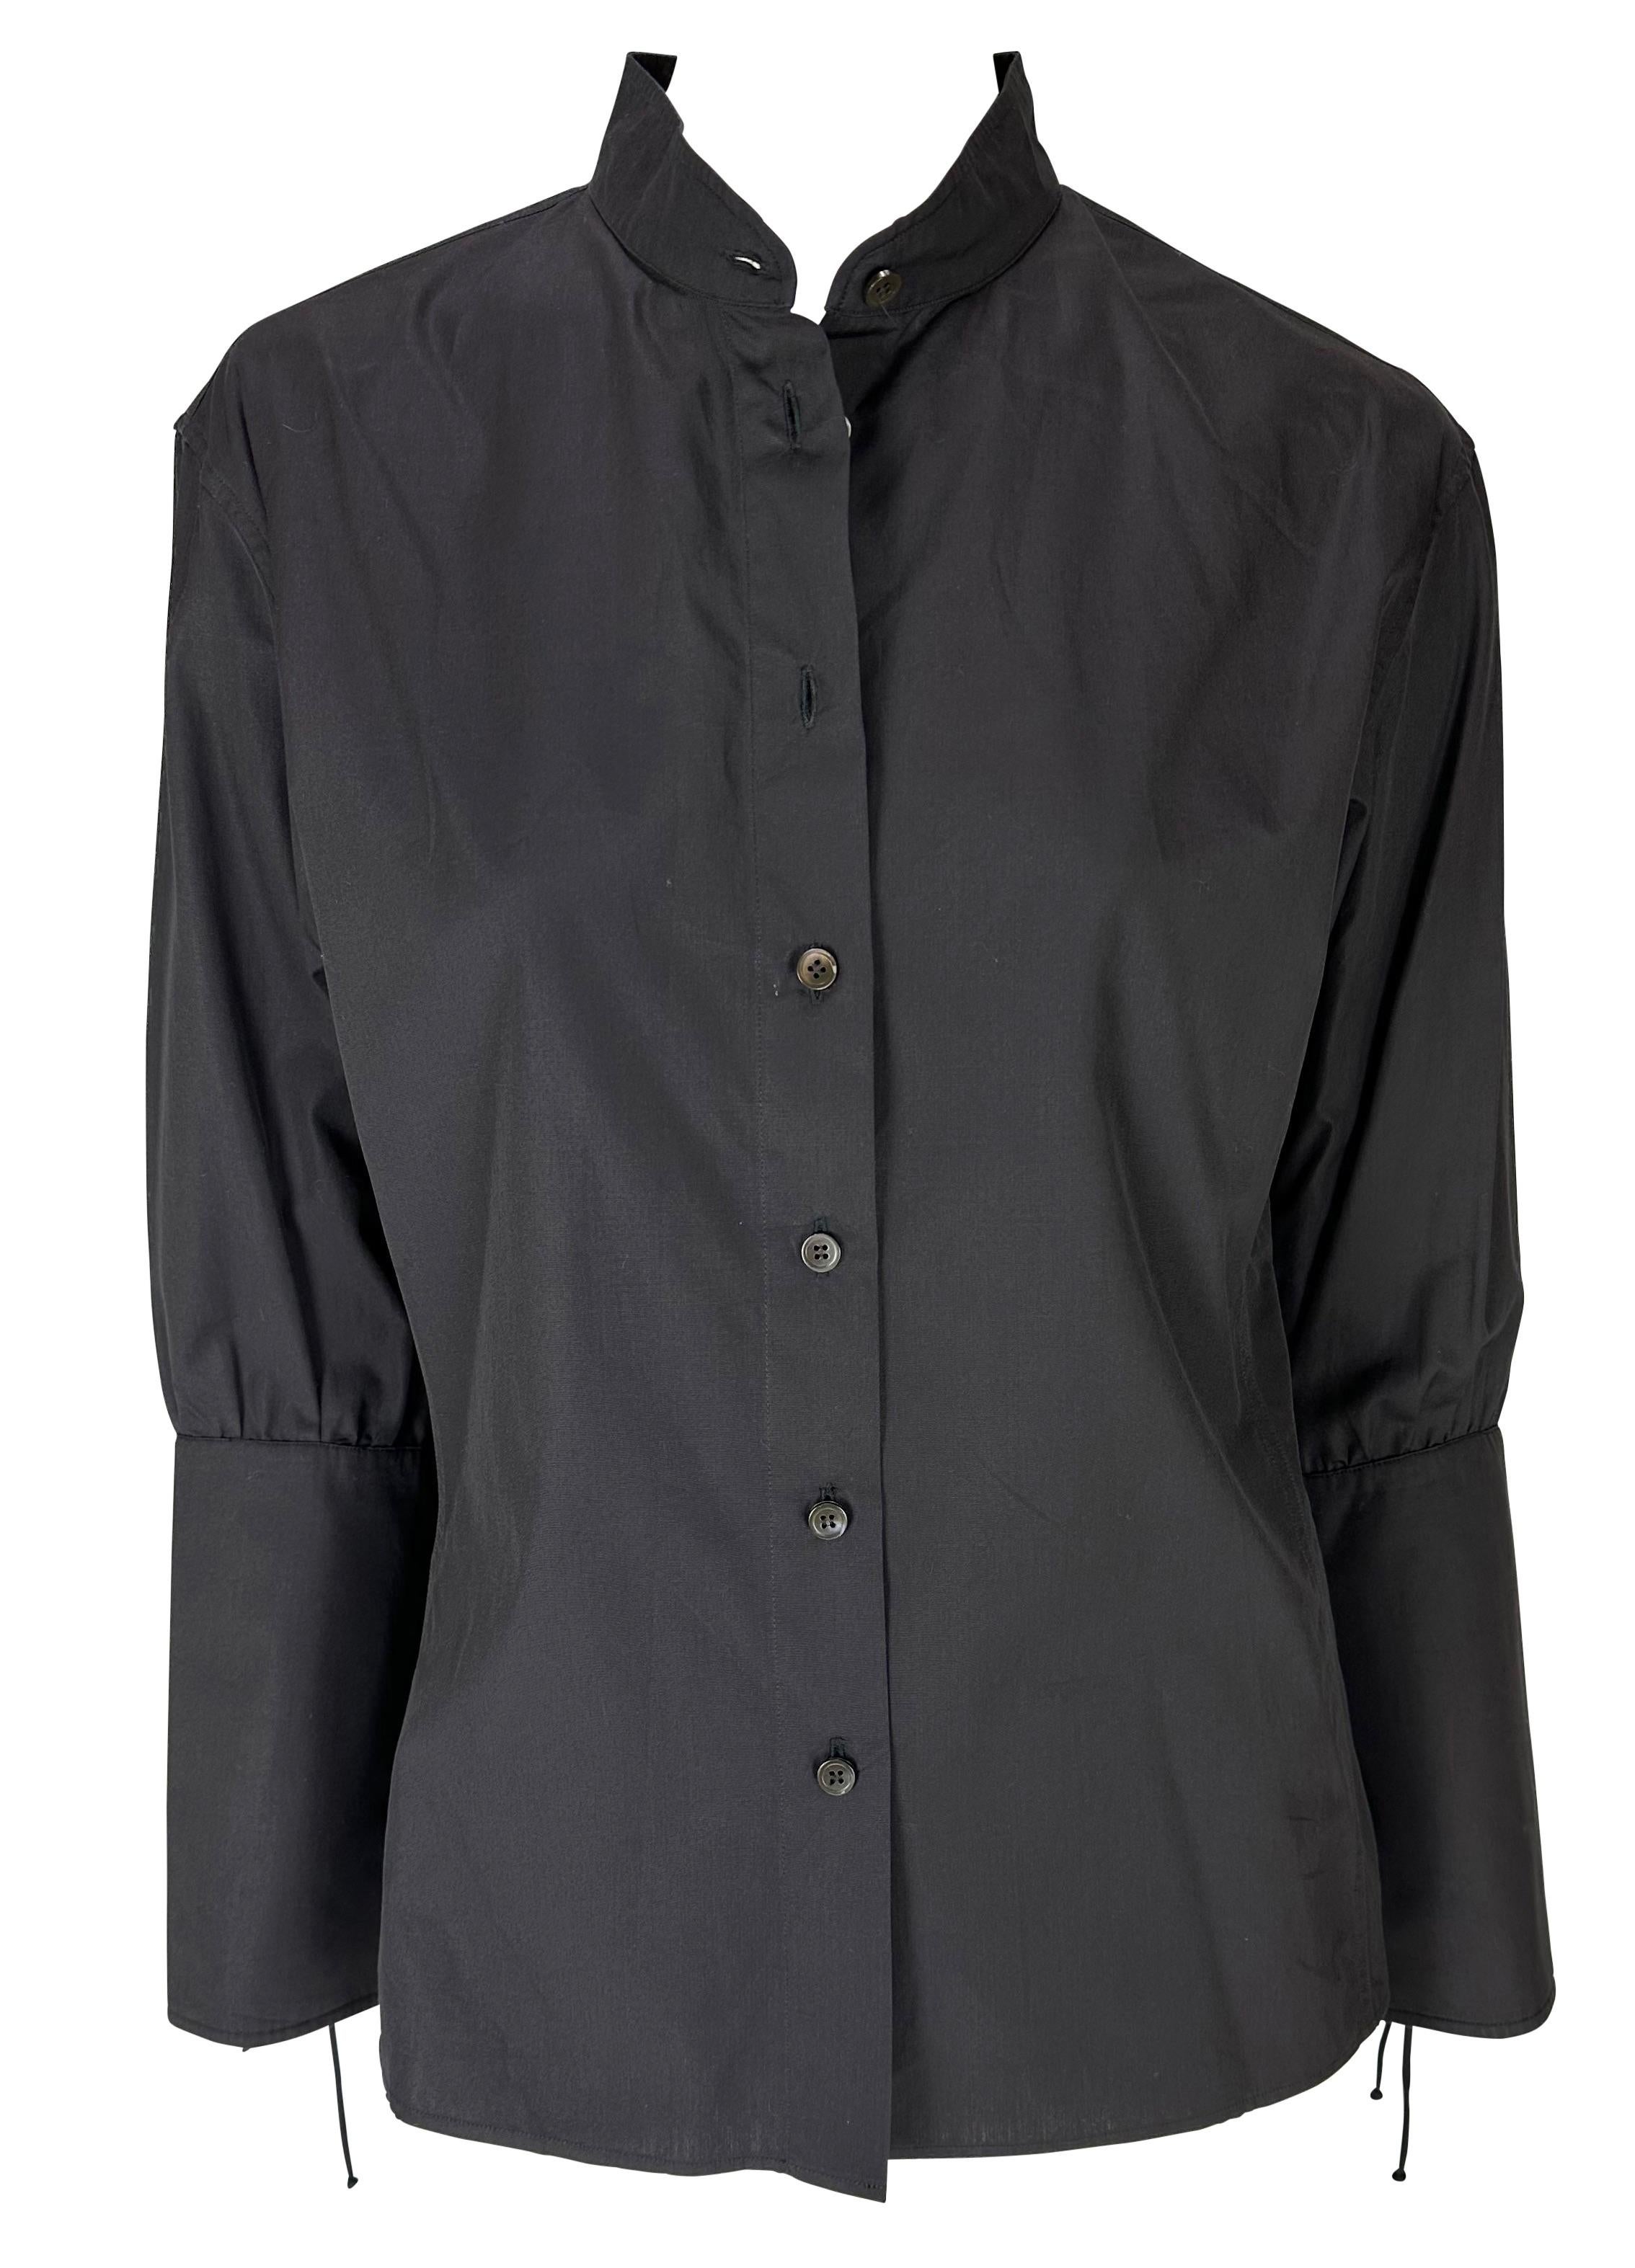 F/W 2001 Yves Saint Laurent by Tom Ford Lace-Up Cuff Black Button-Up Blouse For Sale 3